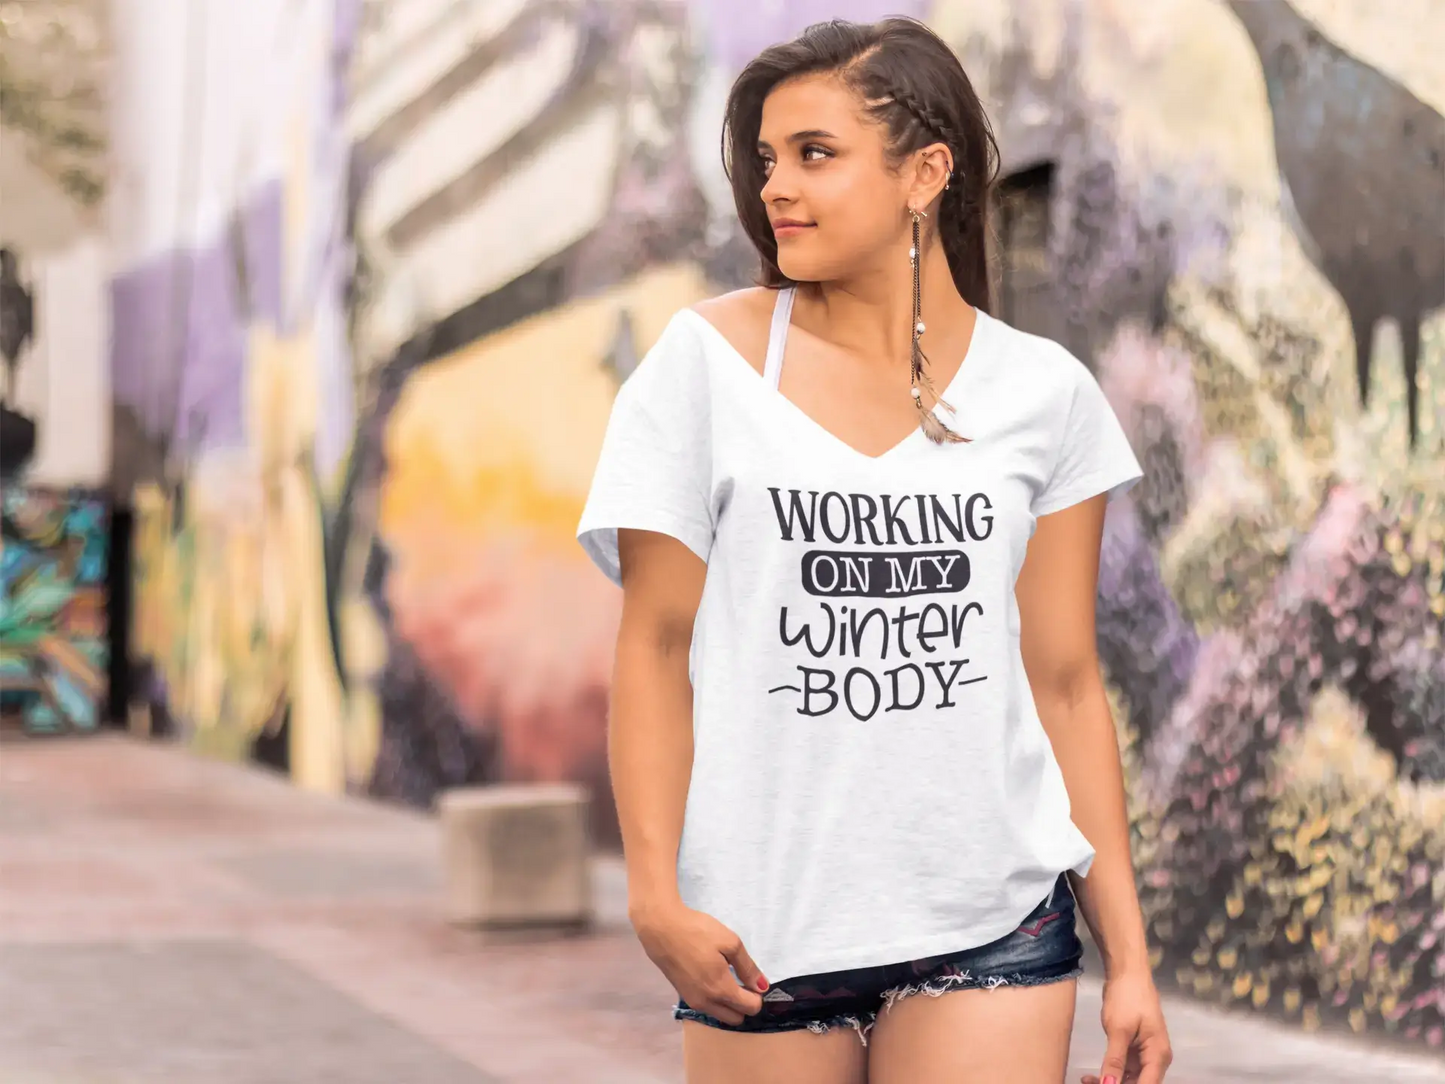 ULTRABASIC Women's Novelty T-Shirt Working On My Winter Body - Funny Quote